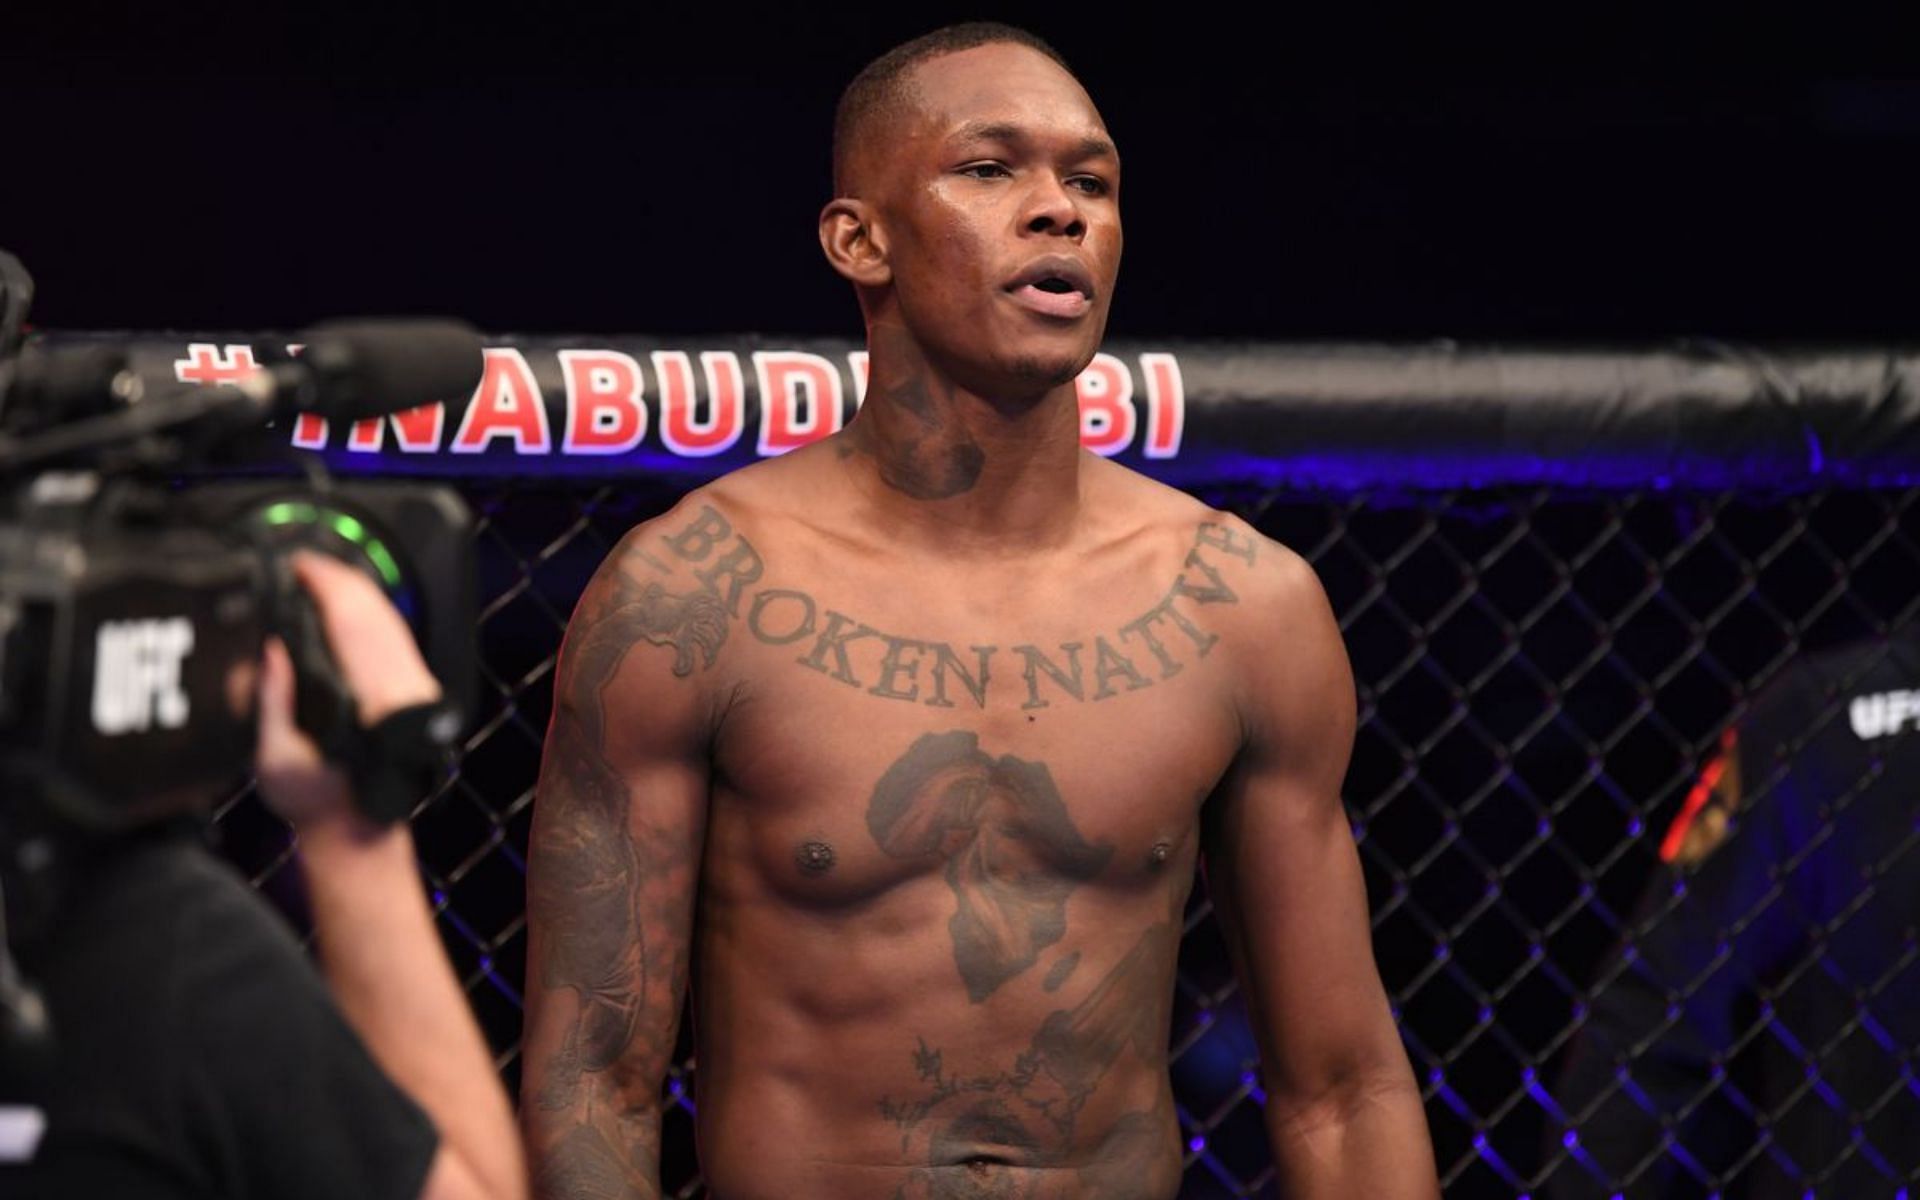 Israel Adesanya narrowly failed to become a UFC champ/champ in 2021